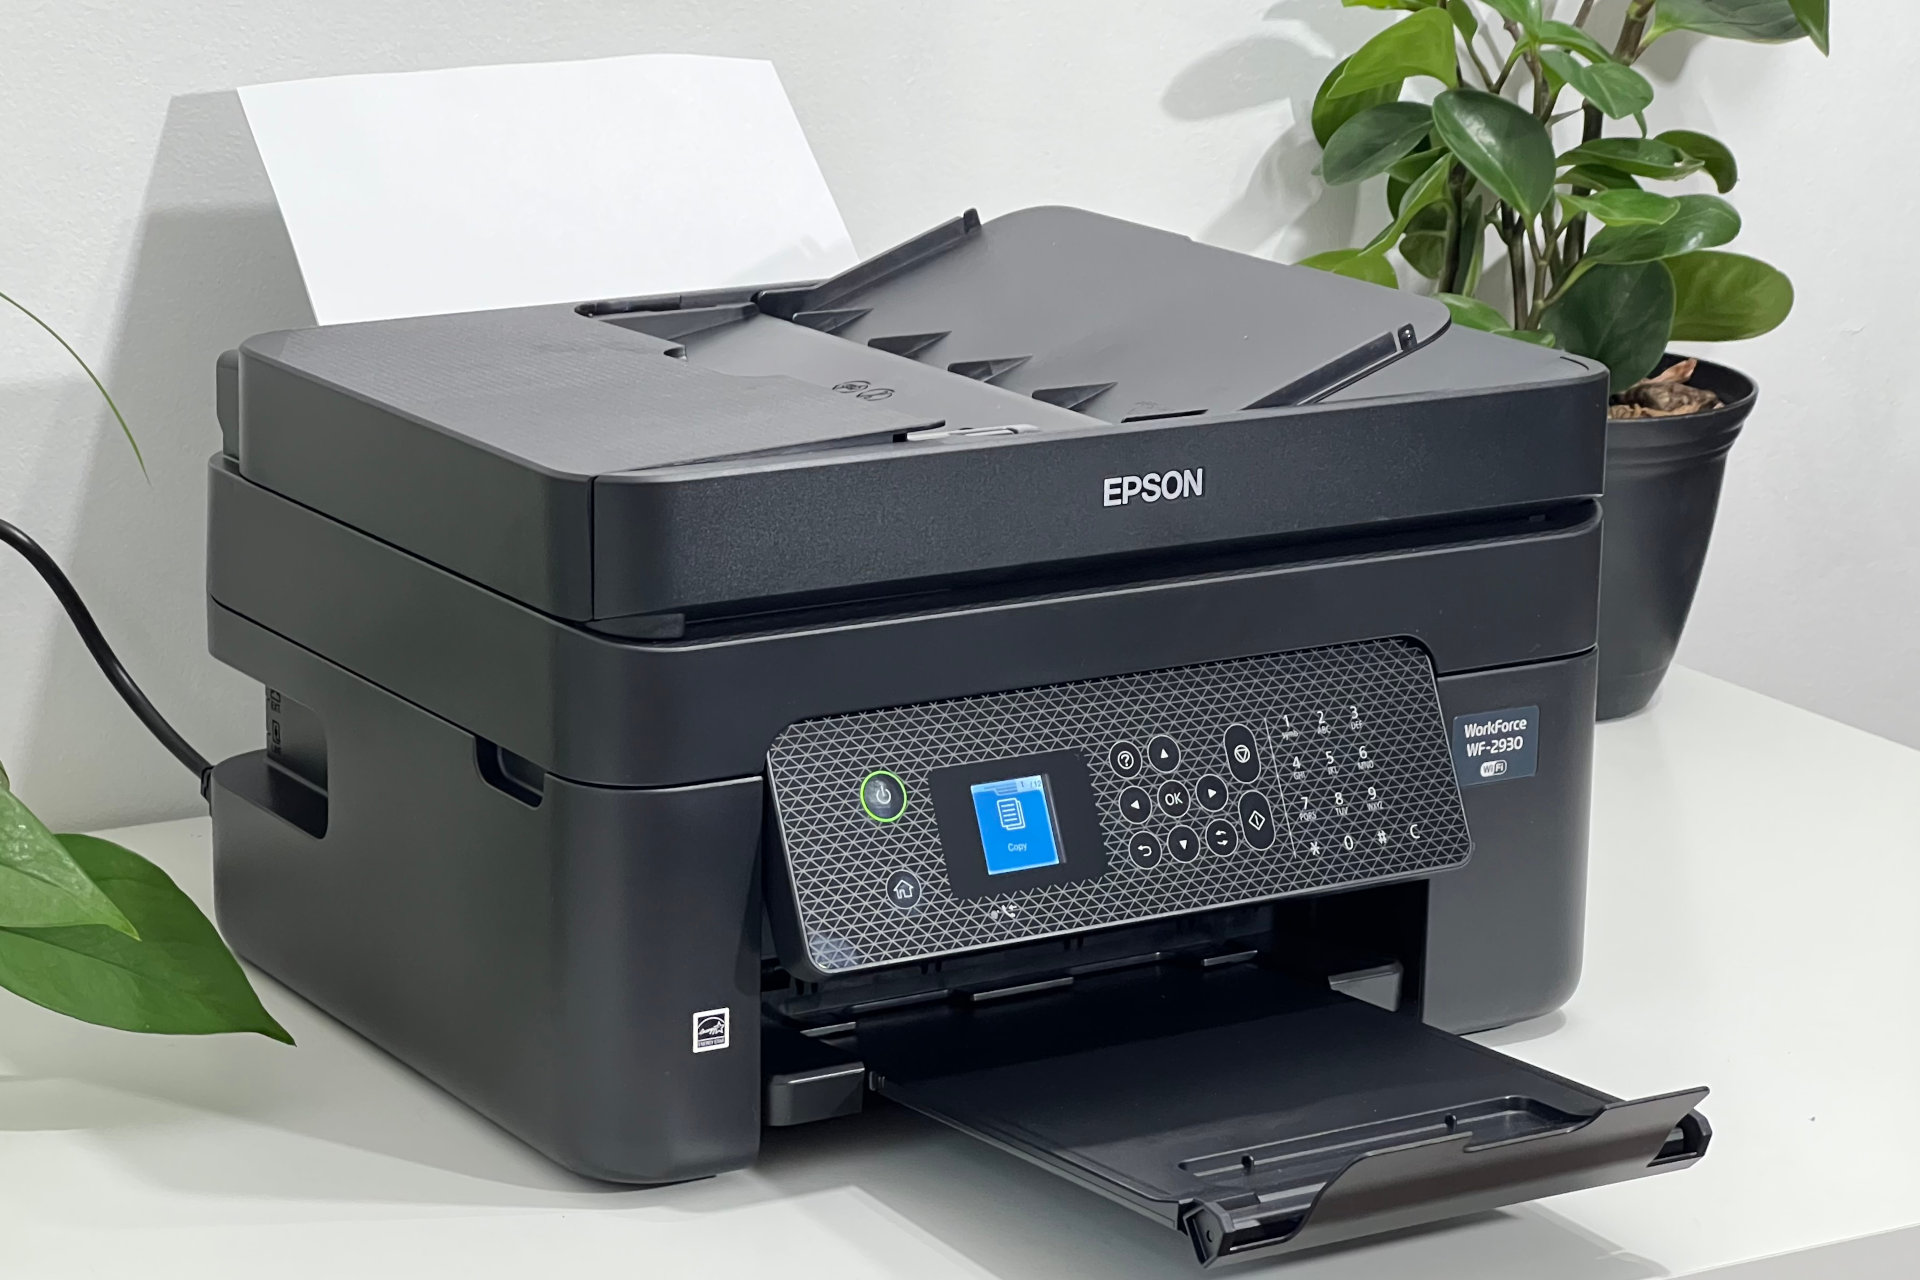 Epson WorkForce WF-2930 review: a low-cost home printer